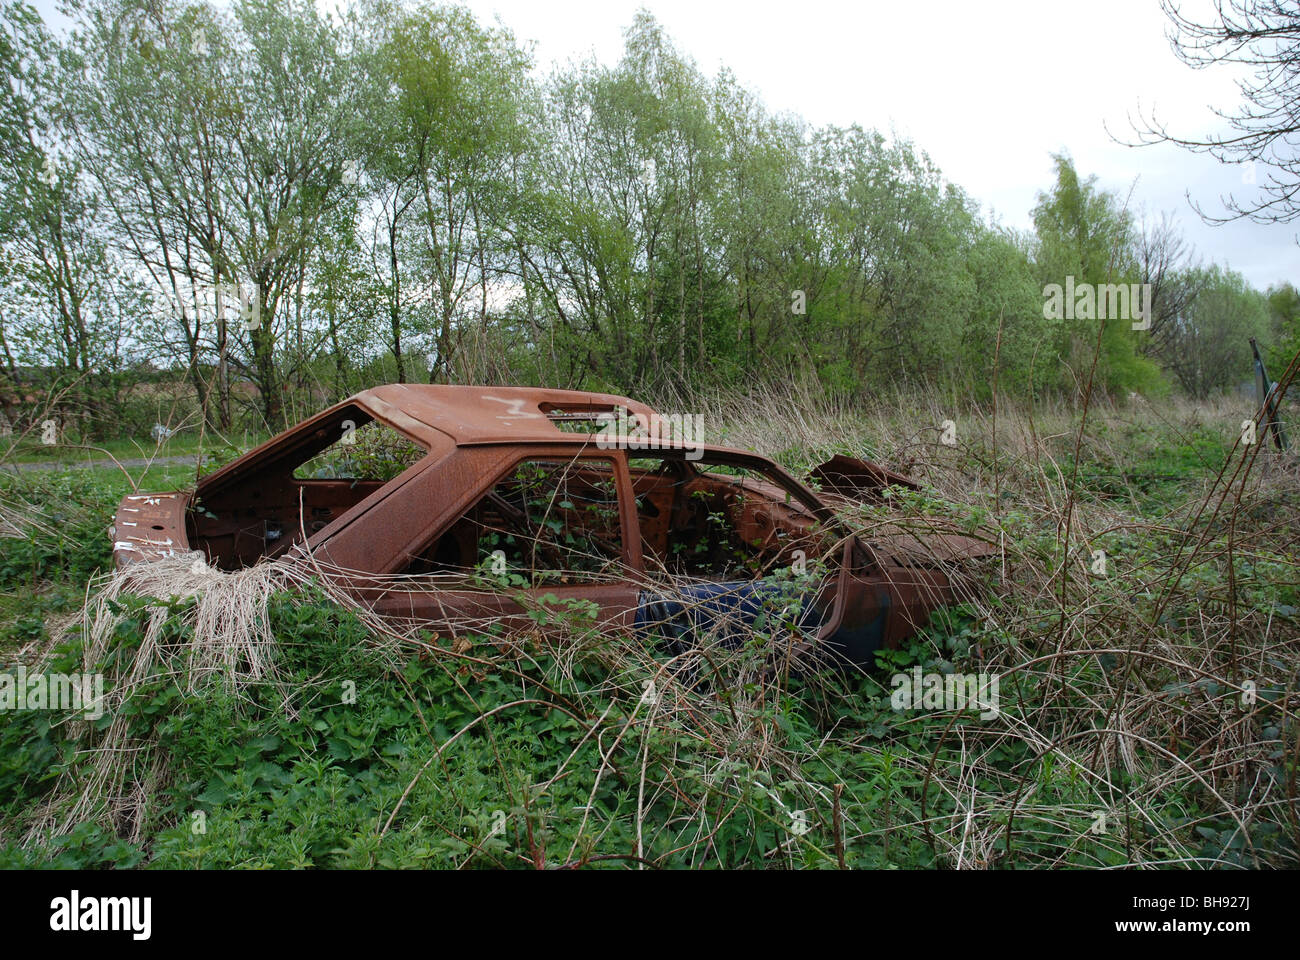 Stolen, burnt out, wrecked car abandoned and overgrown with nettles. Stock Photo